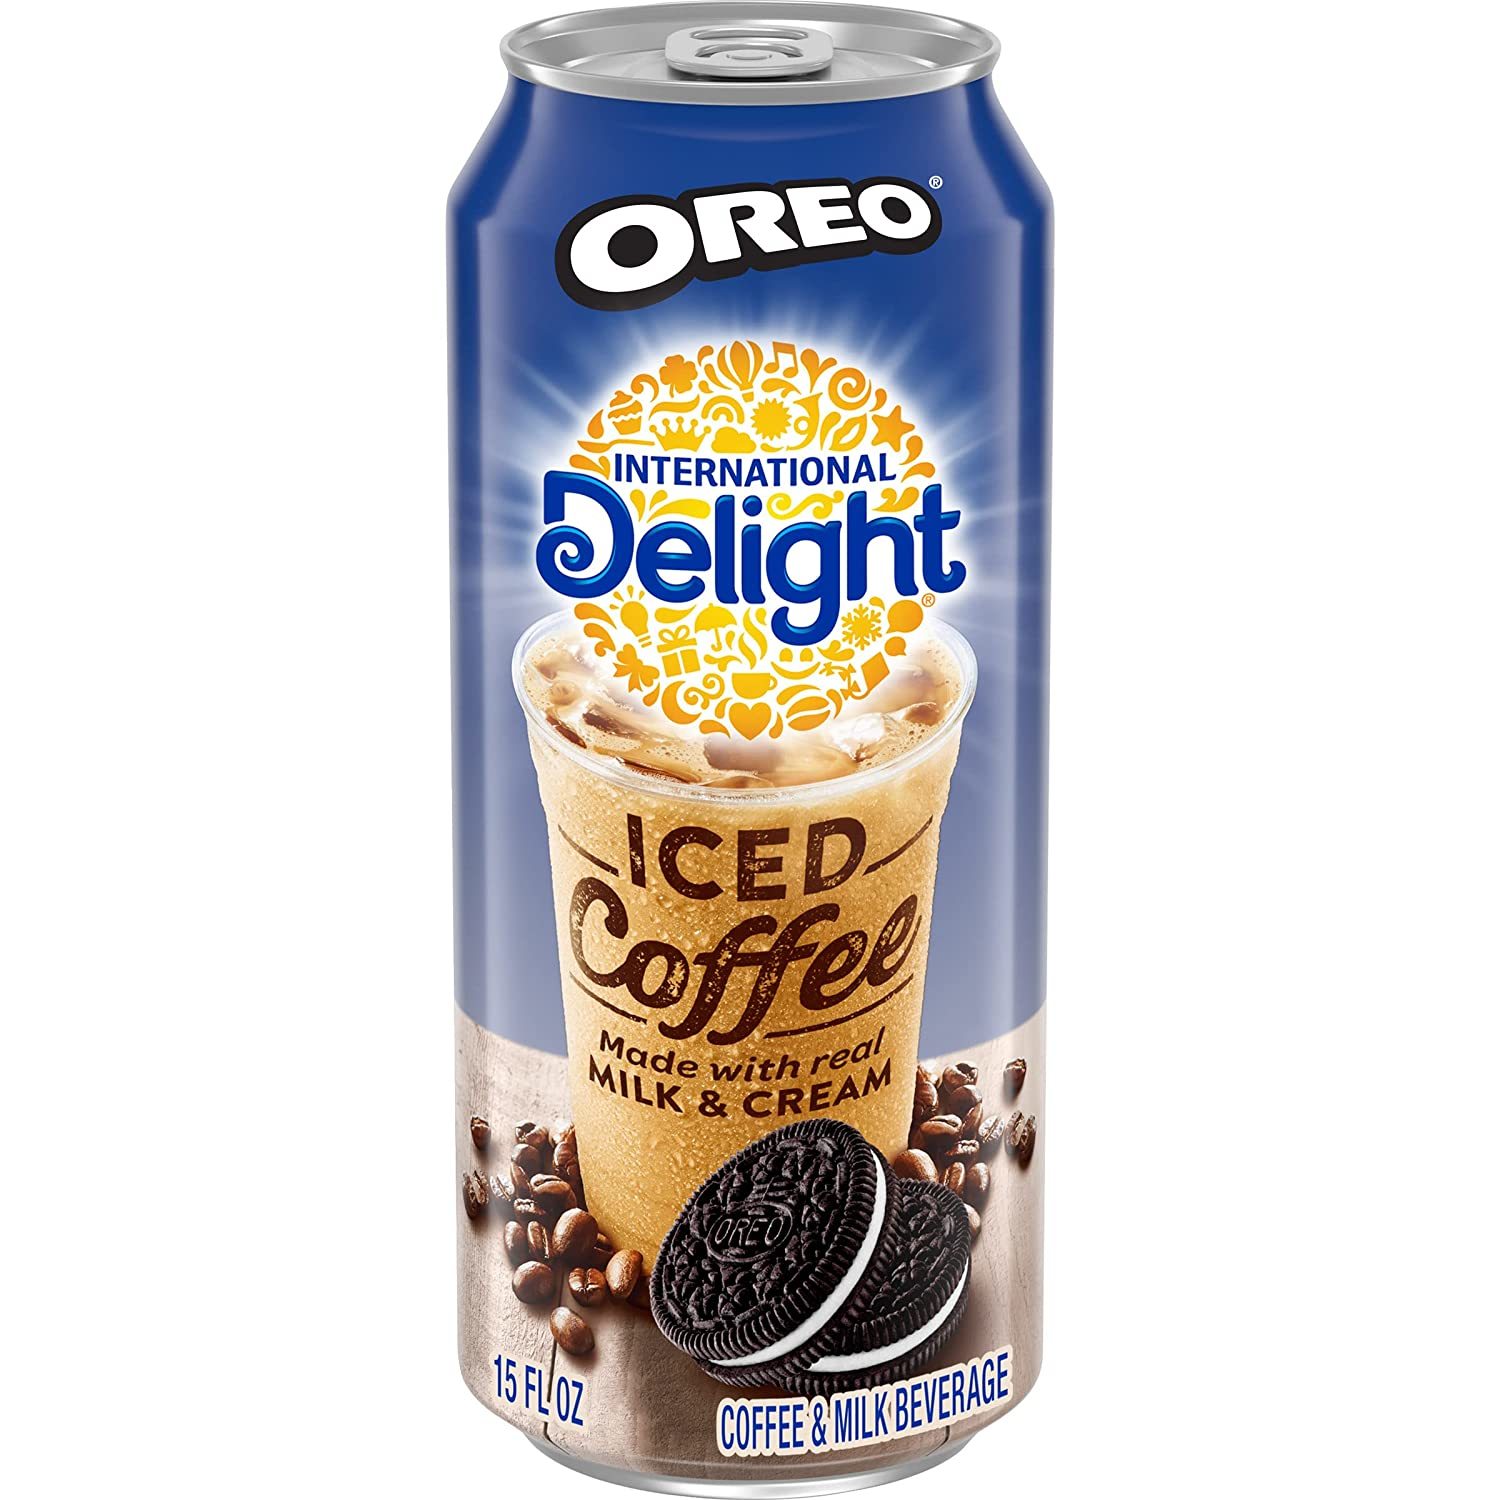 Primary image for International Delight Iced Coffee, Oreo Cookie, 15 Fl Oz, Pack of 12 